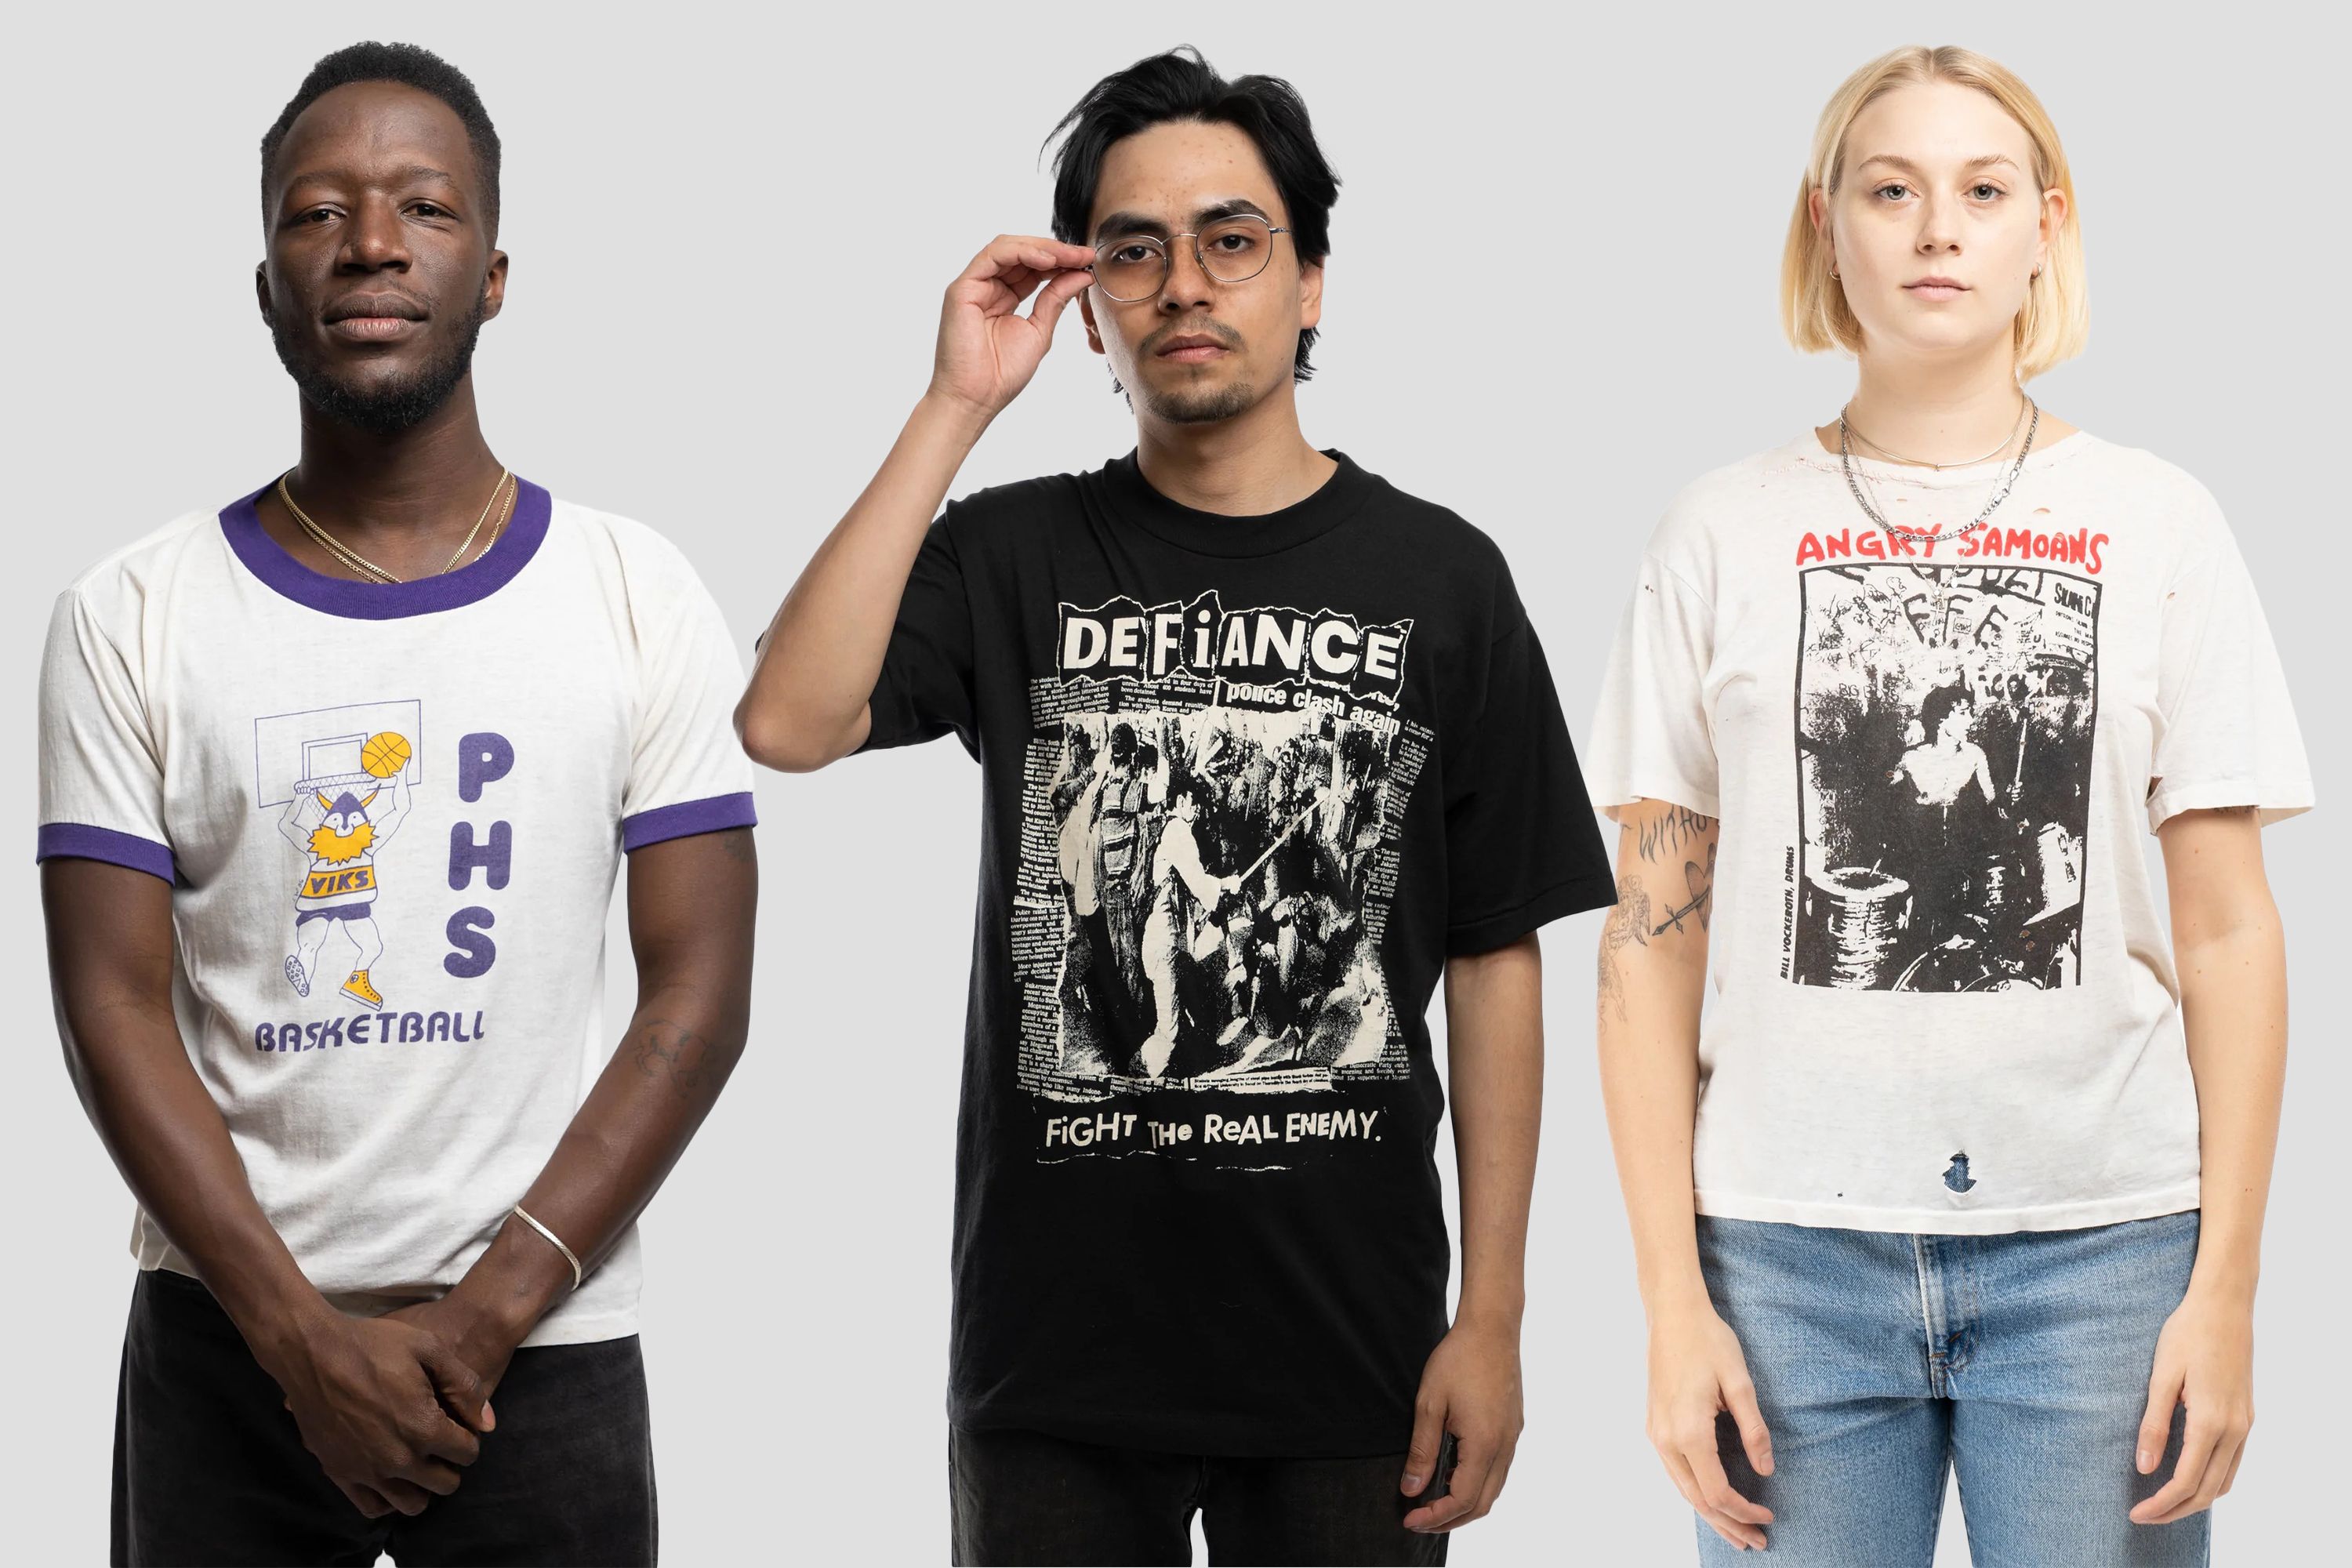 Everything You to About T-Shirts, According to Experts